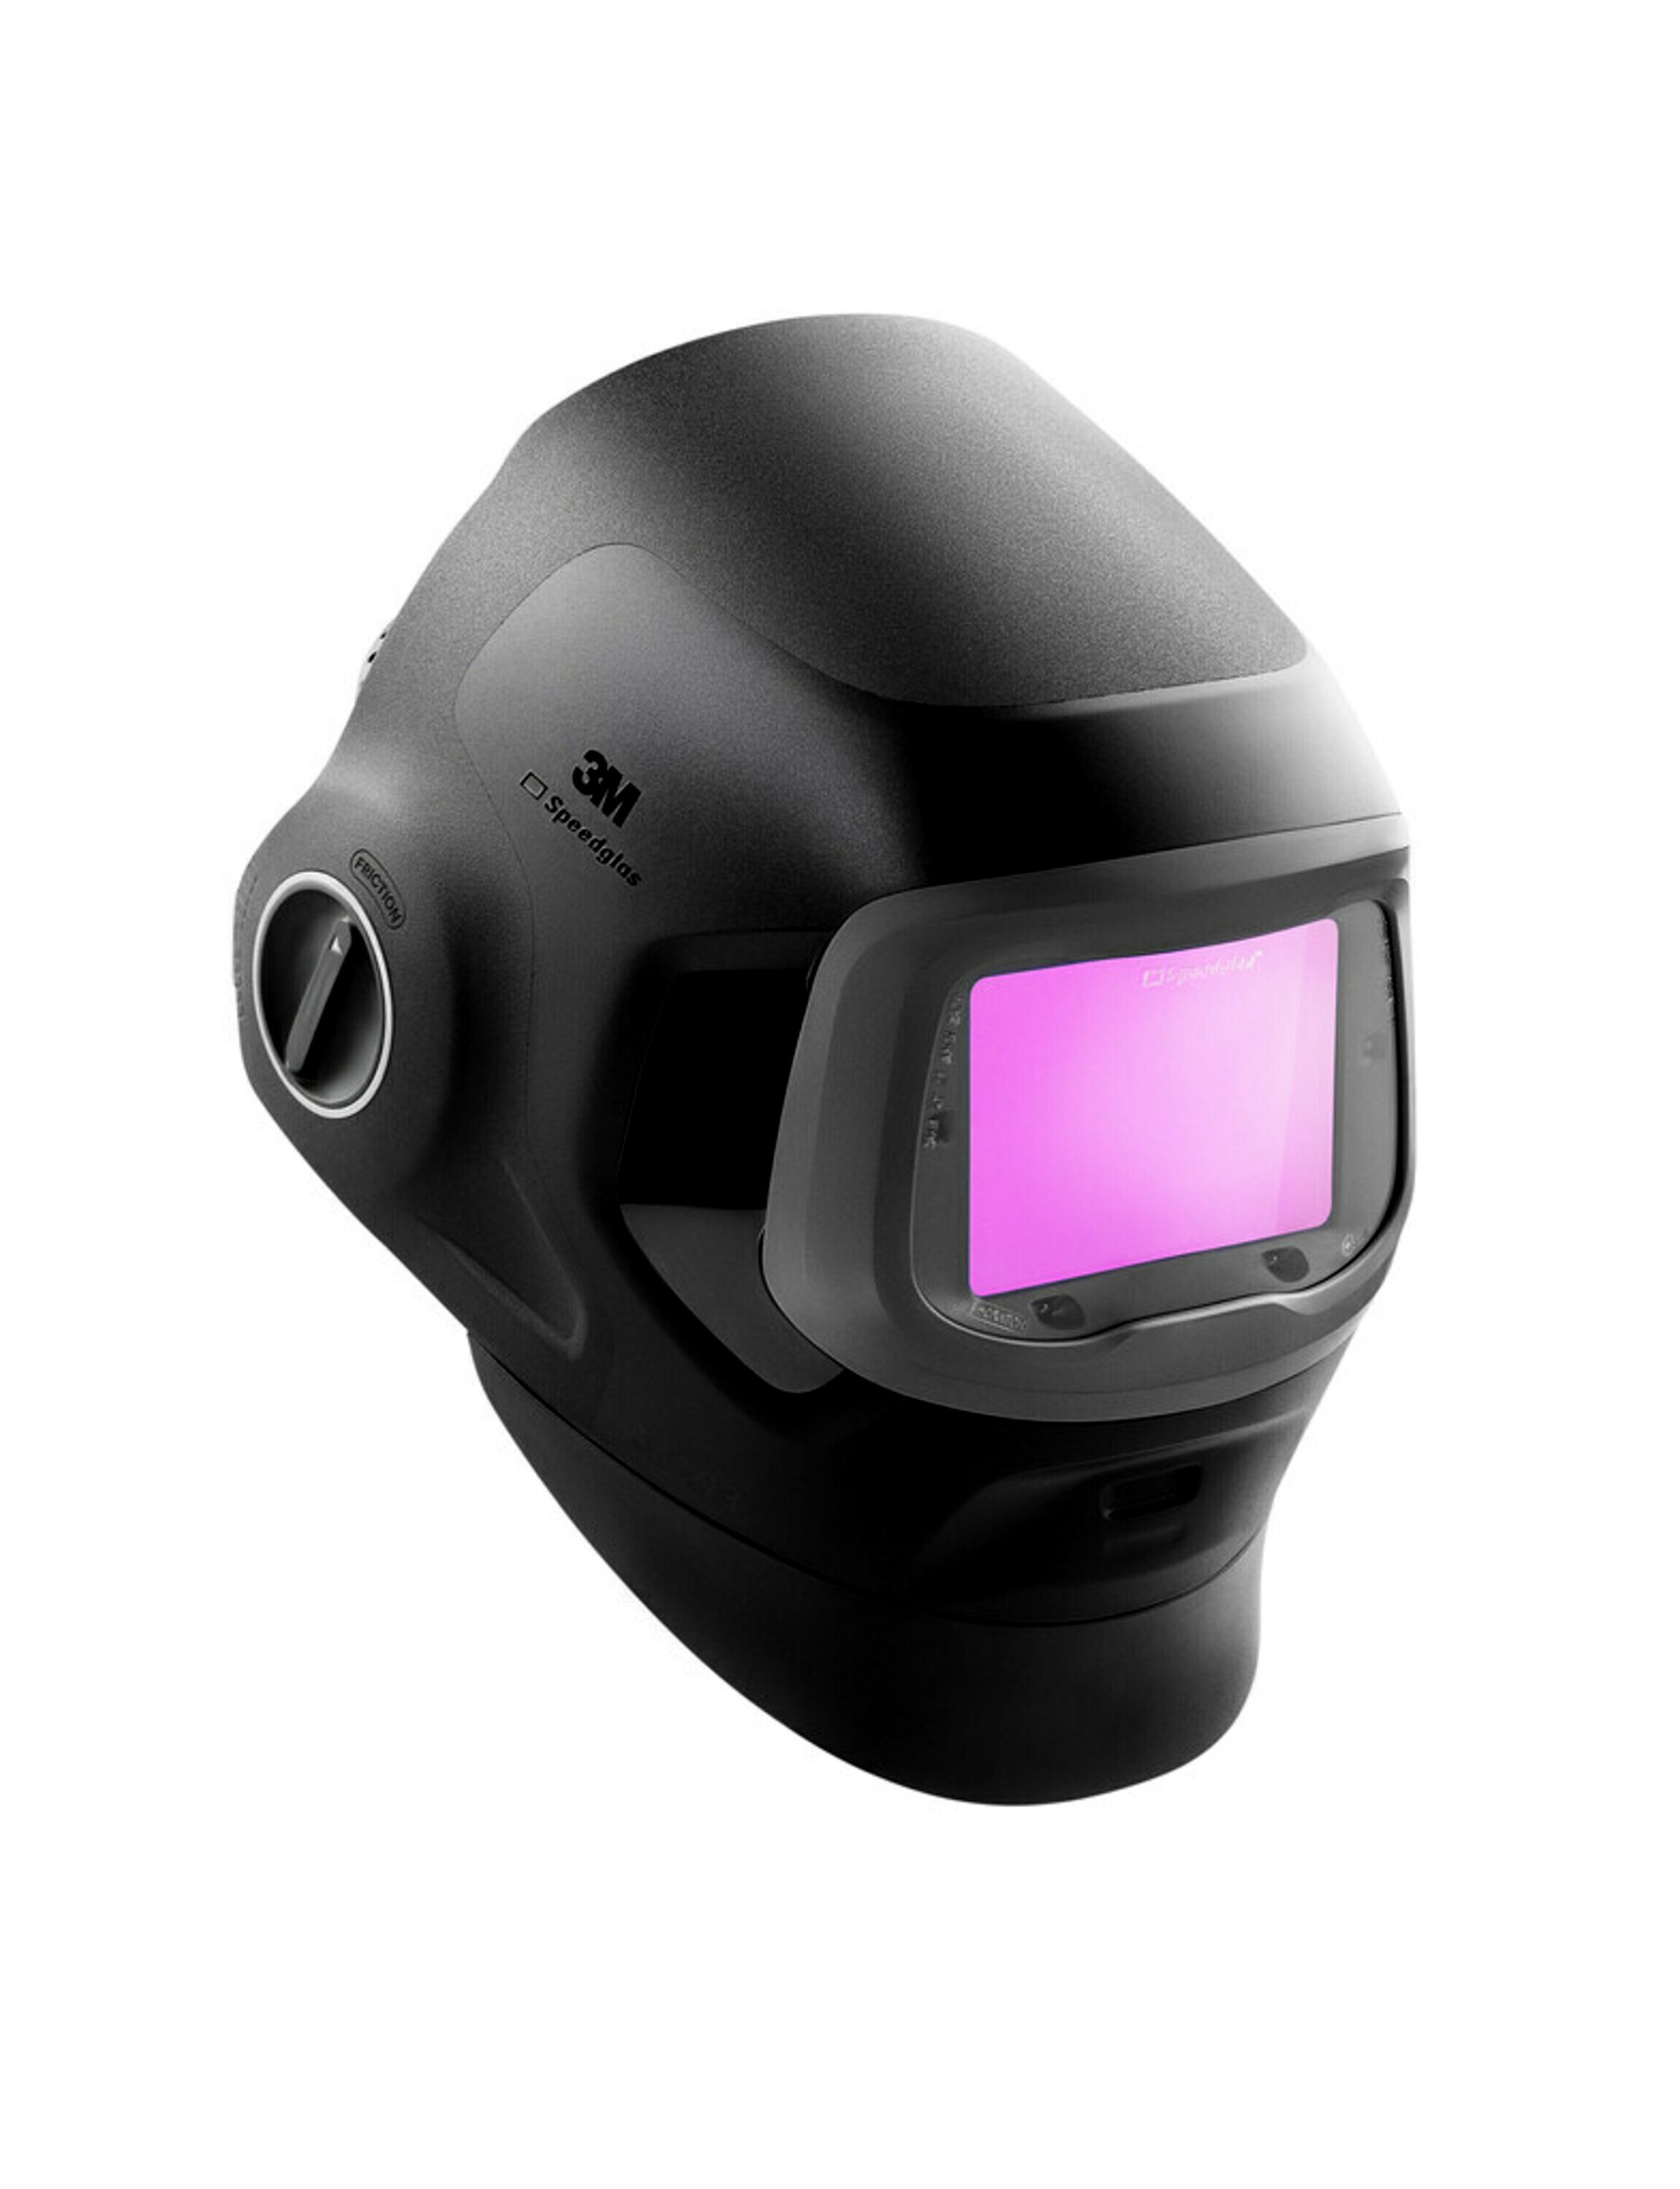 3M Speedglas Welding mask G5-03 Pro with automatic welding filter (ADF) 03TW 631820